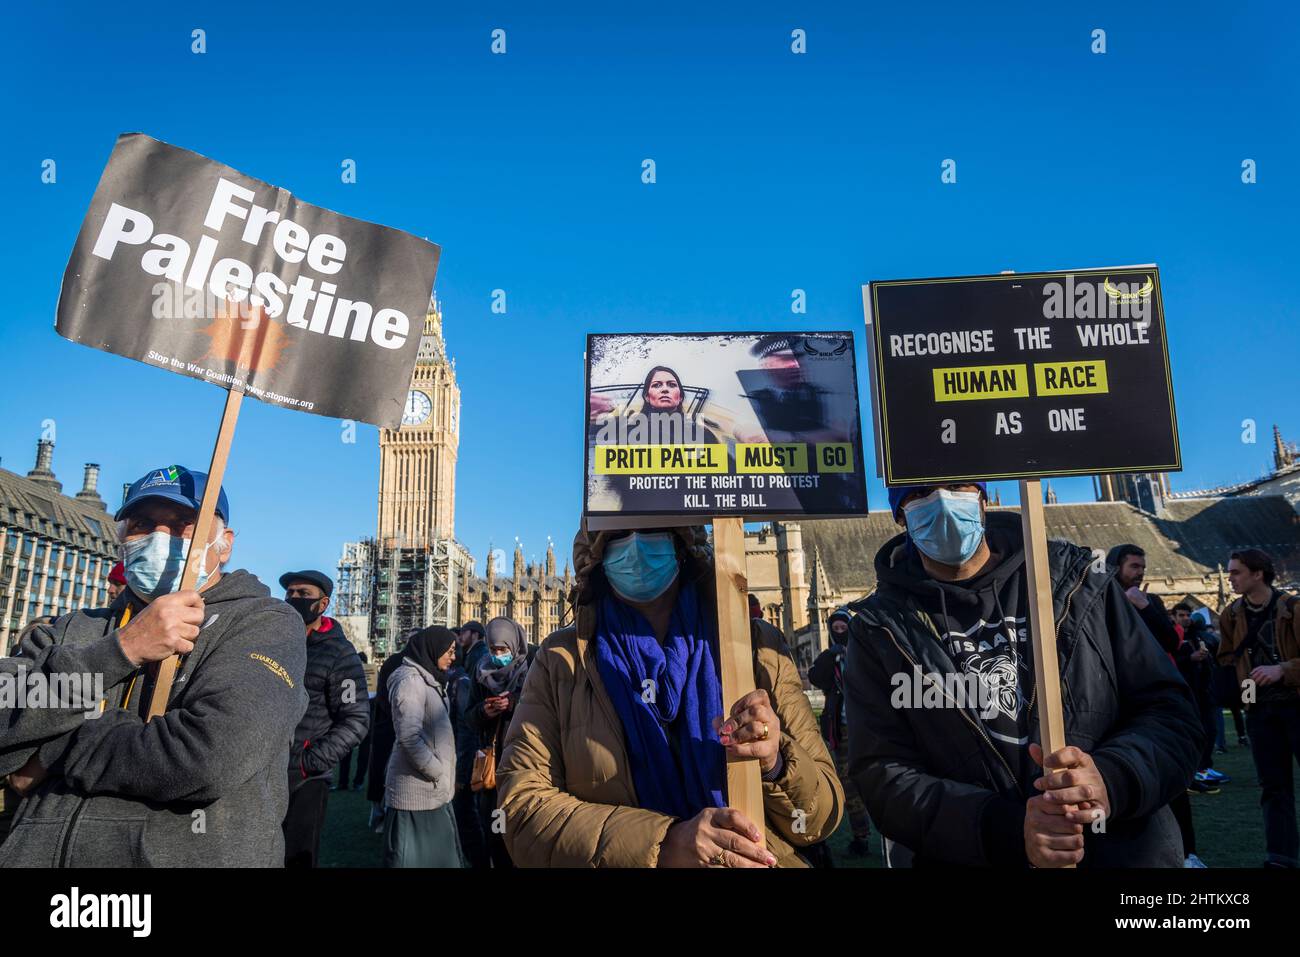 Protestors holding placards against Priti Patel and the Nationality and Borders Bill, Parliament Square, London, UK, 27th February 2022 Stock Photo